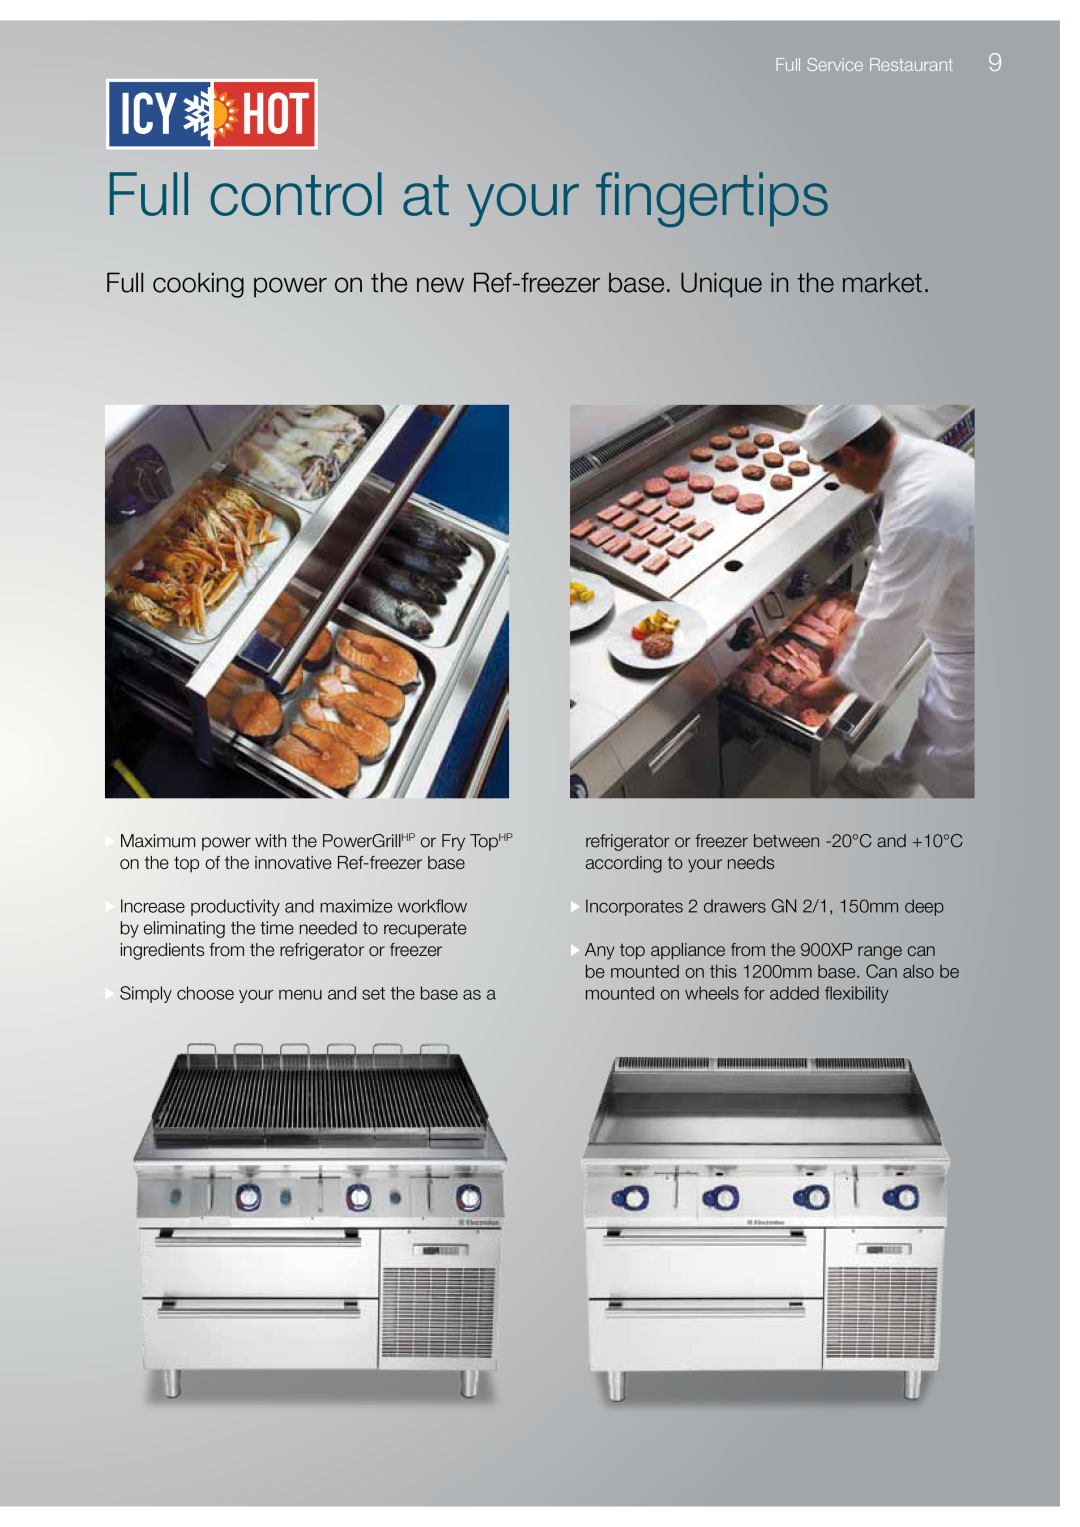 Electrolux 700XP Full control at your fingertips, Full cooking power on the new Ref-freezer base. Unique in the market 